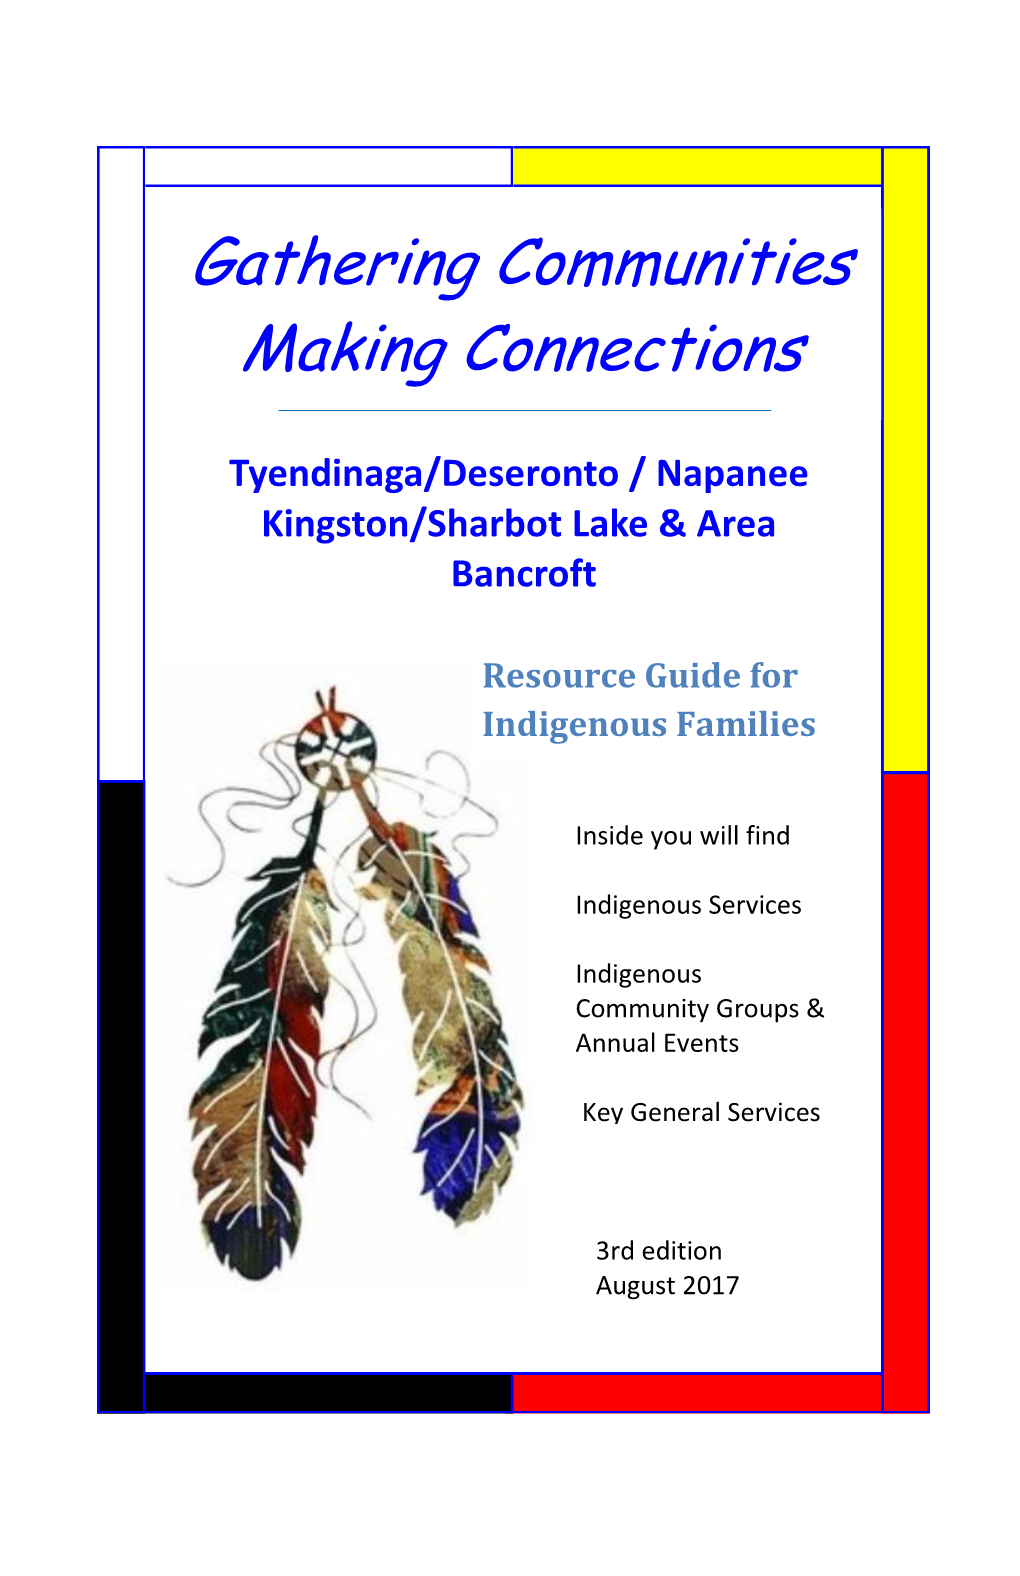 Resource Guide for Indigenous Families(Link Is External)